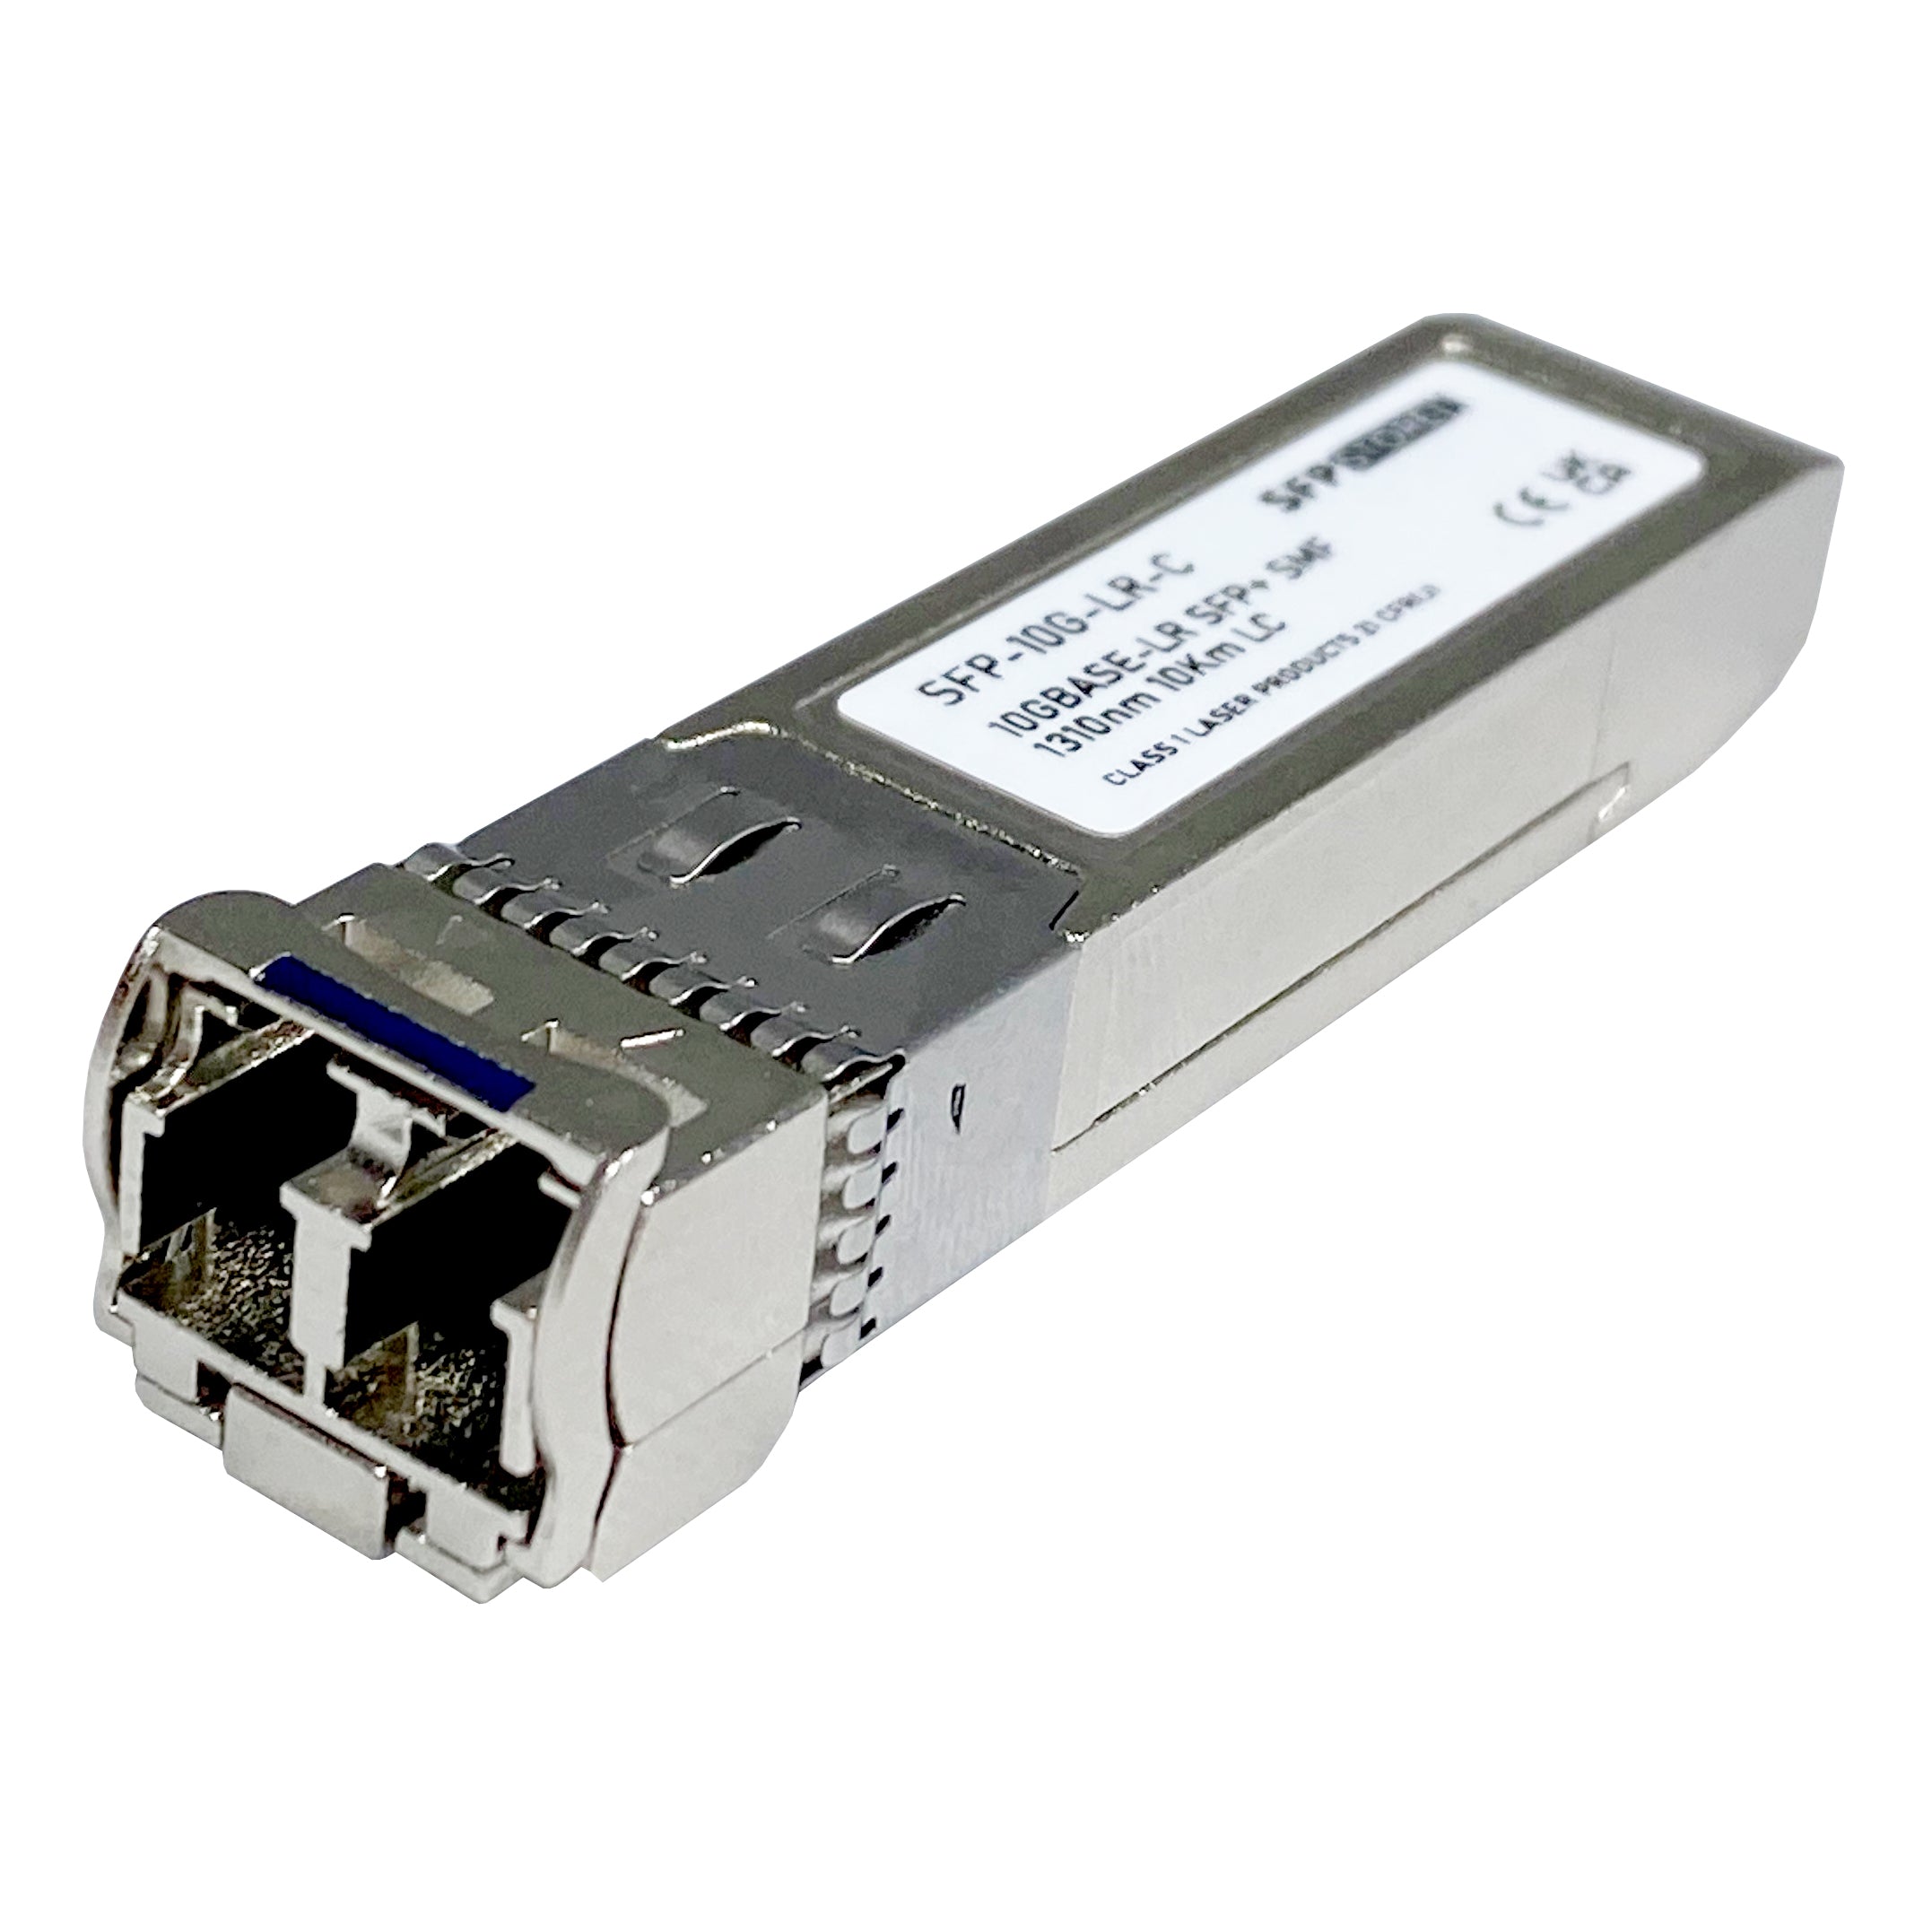 OSX010000-C Huawei Compatible 10G LR SFP+ LC Transceiver